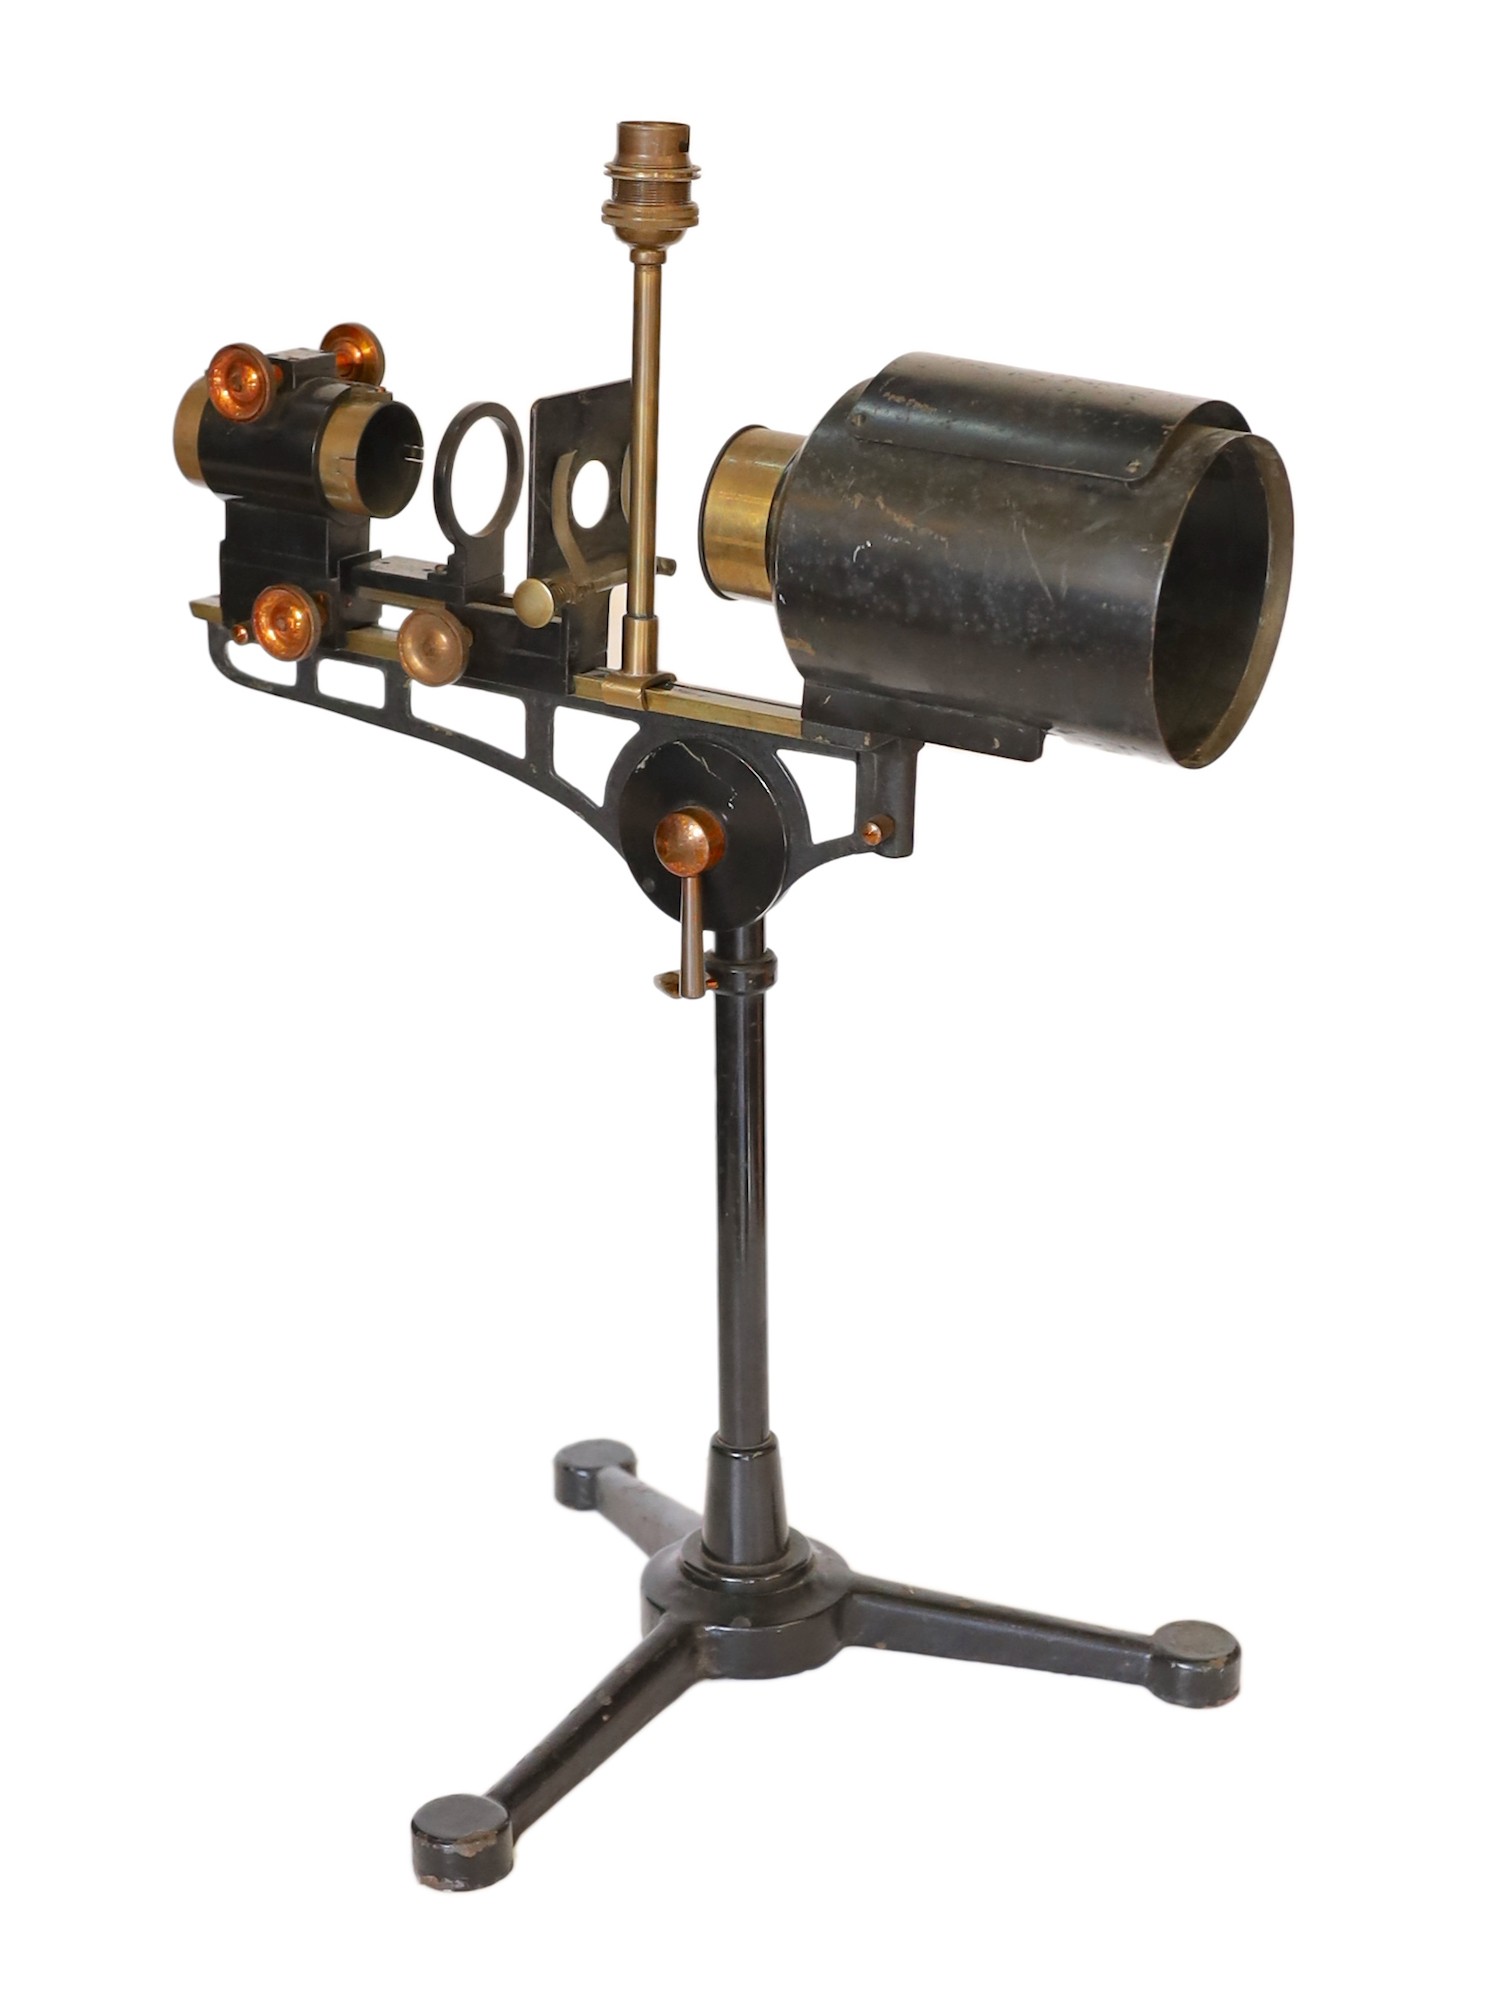 An early 20th century Hatters & Garnett Ltd black lacquered and brass microscope slide projector table lamp (conversion), height 57cm